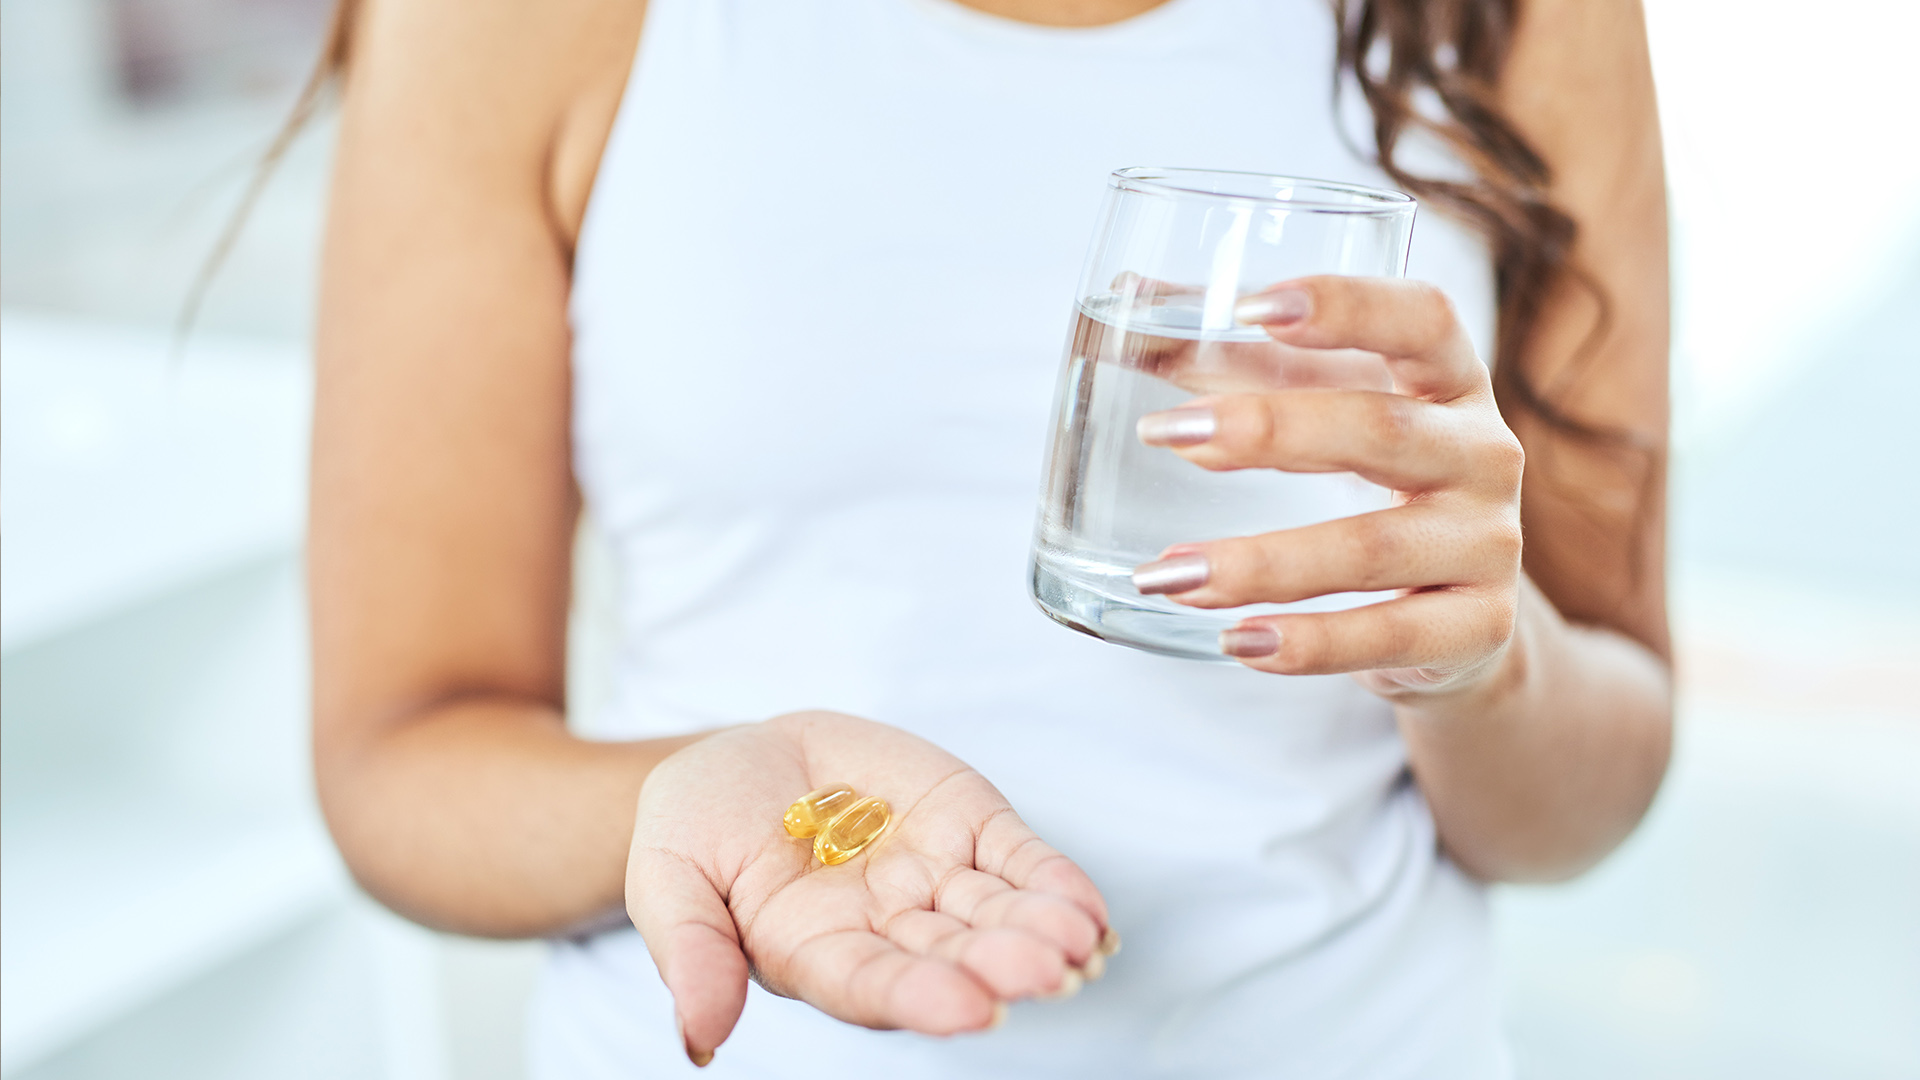 Are your vitamin supplements safe to use if you’re on a gluten-free diet?